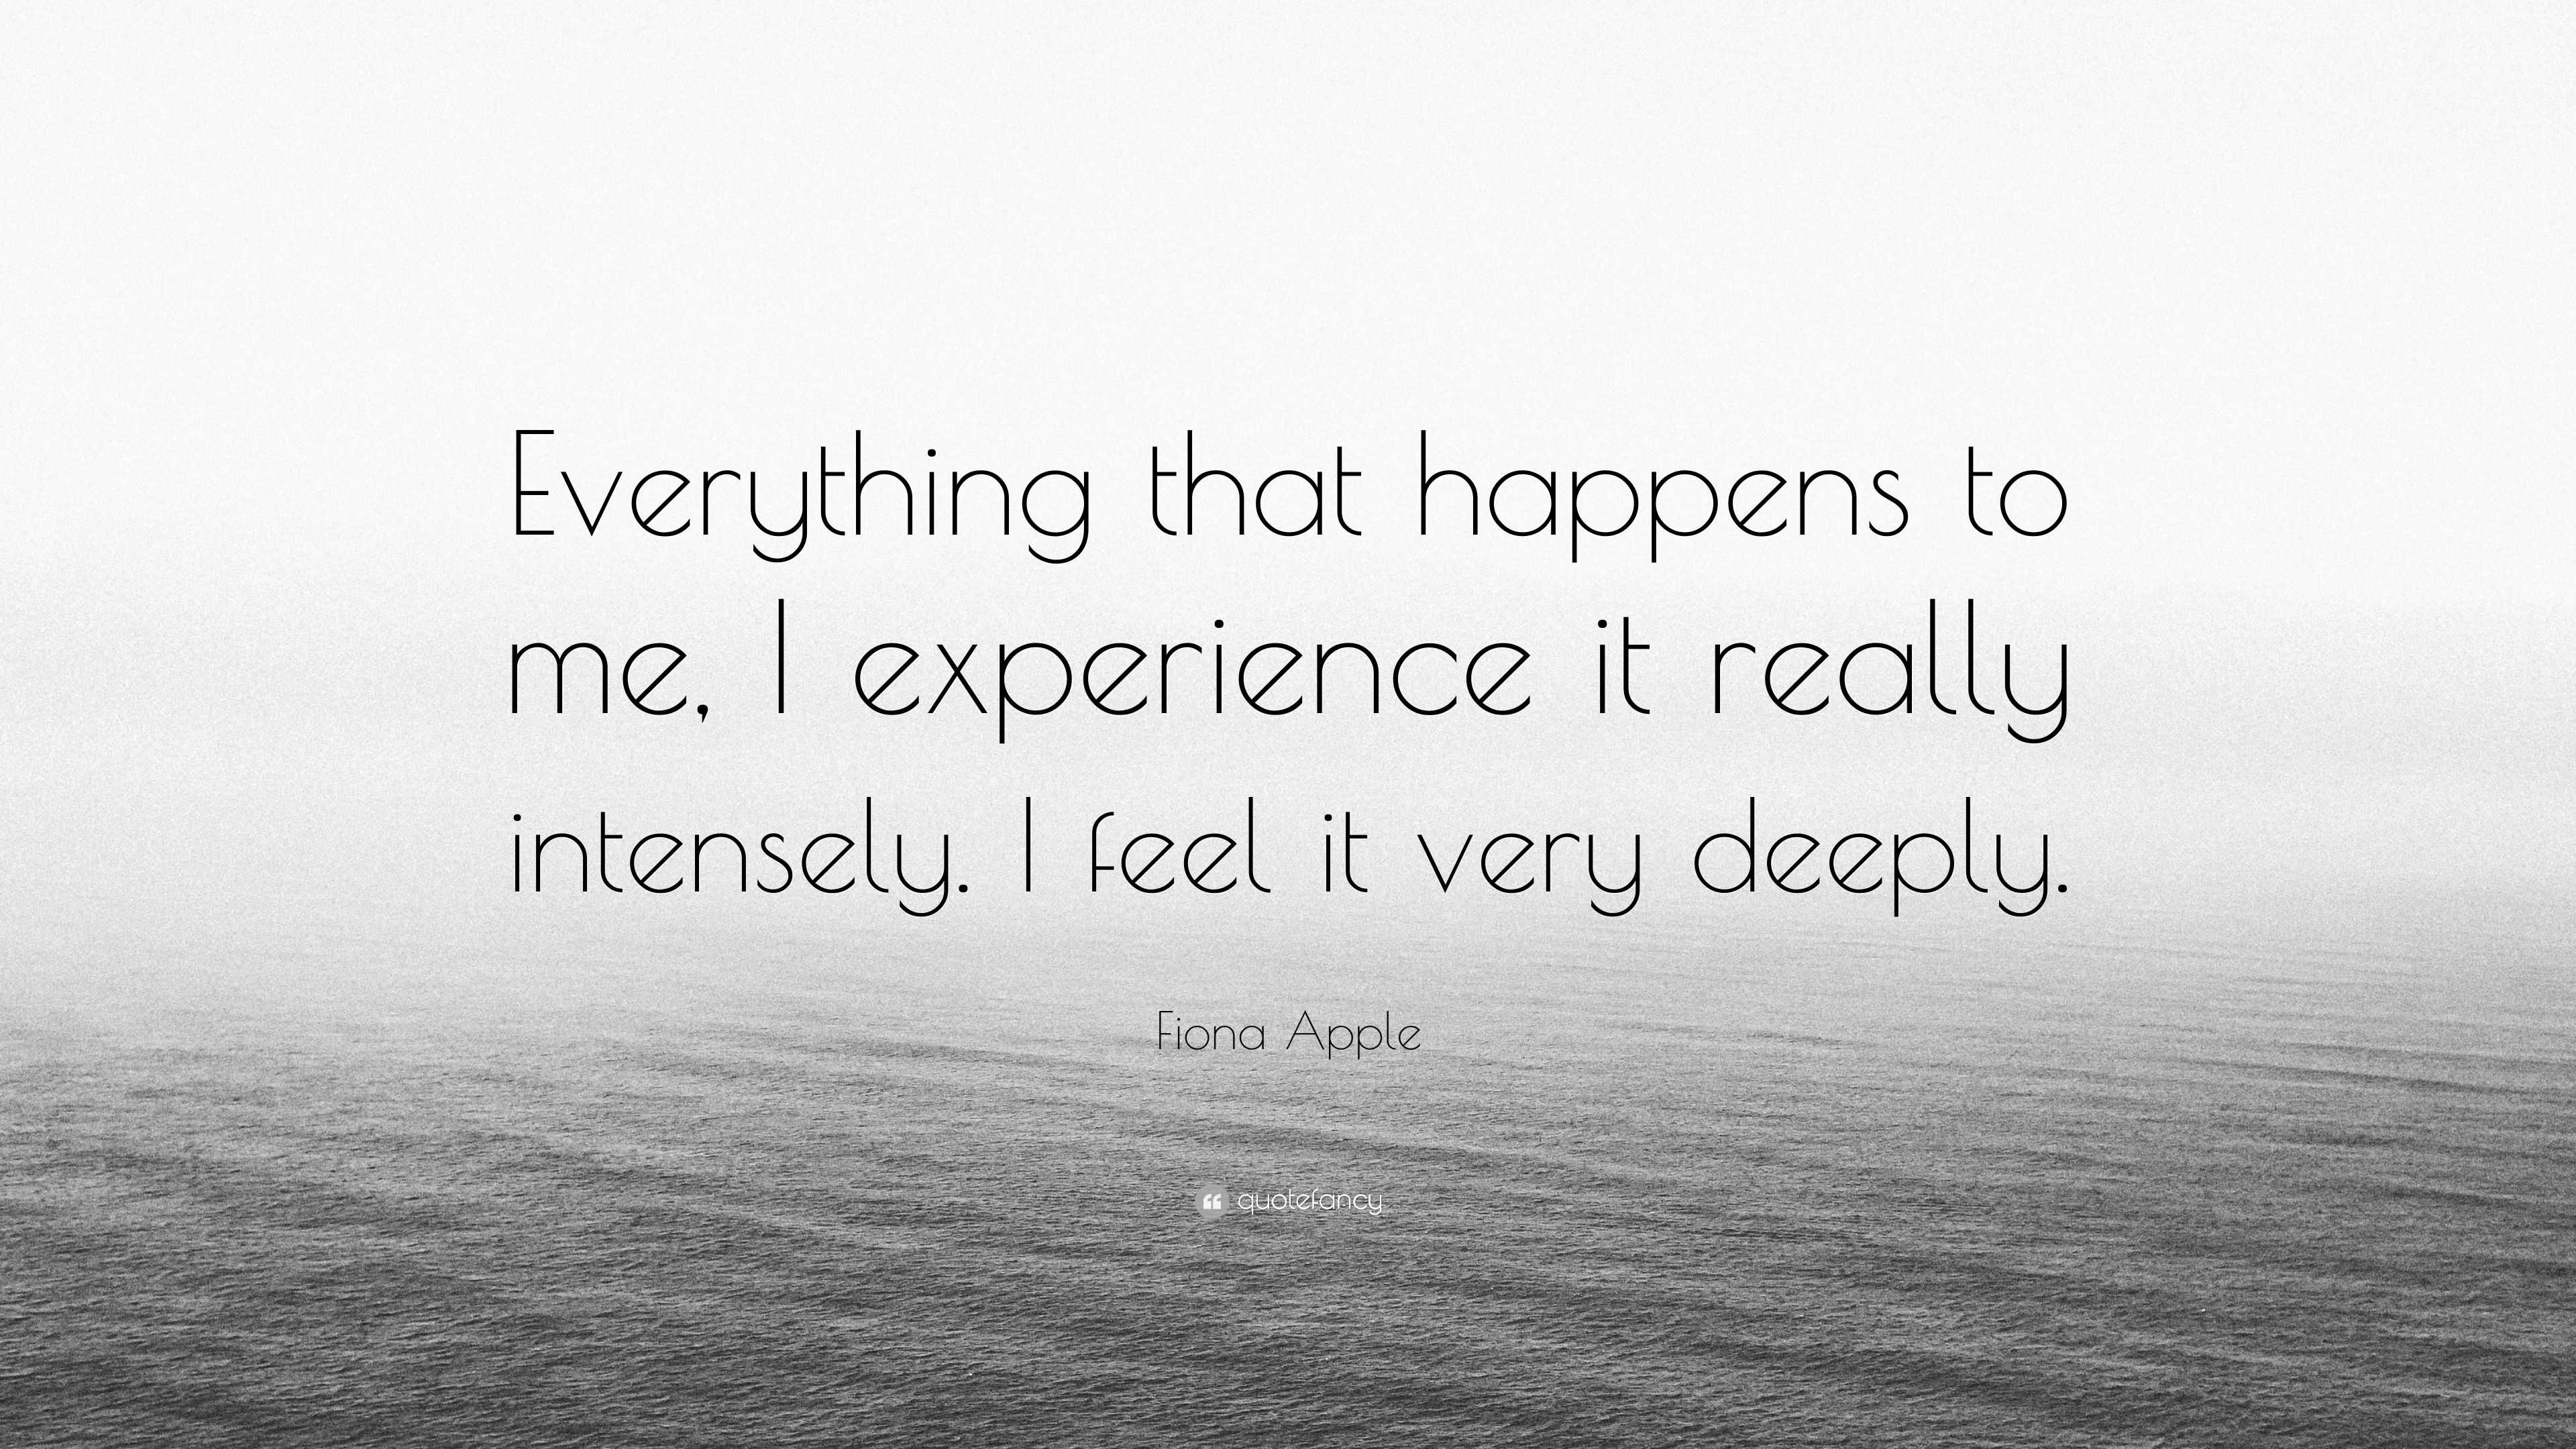 Fiona Apple Quote: "Everything that happens to me, I ...